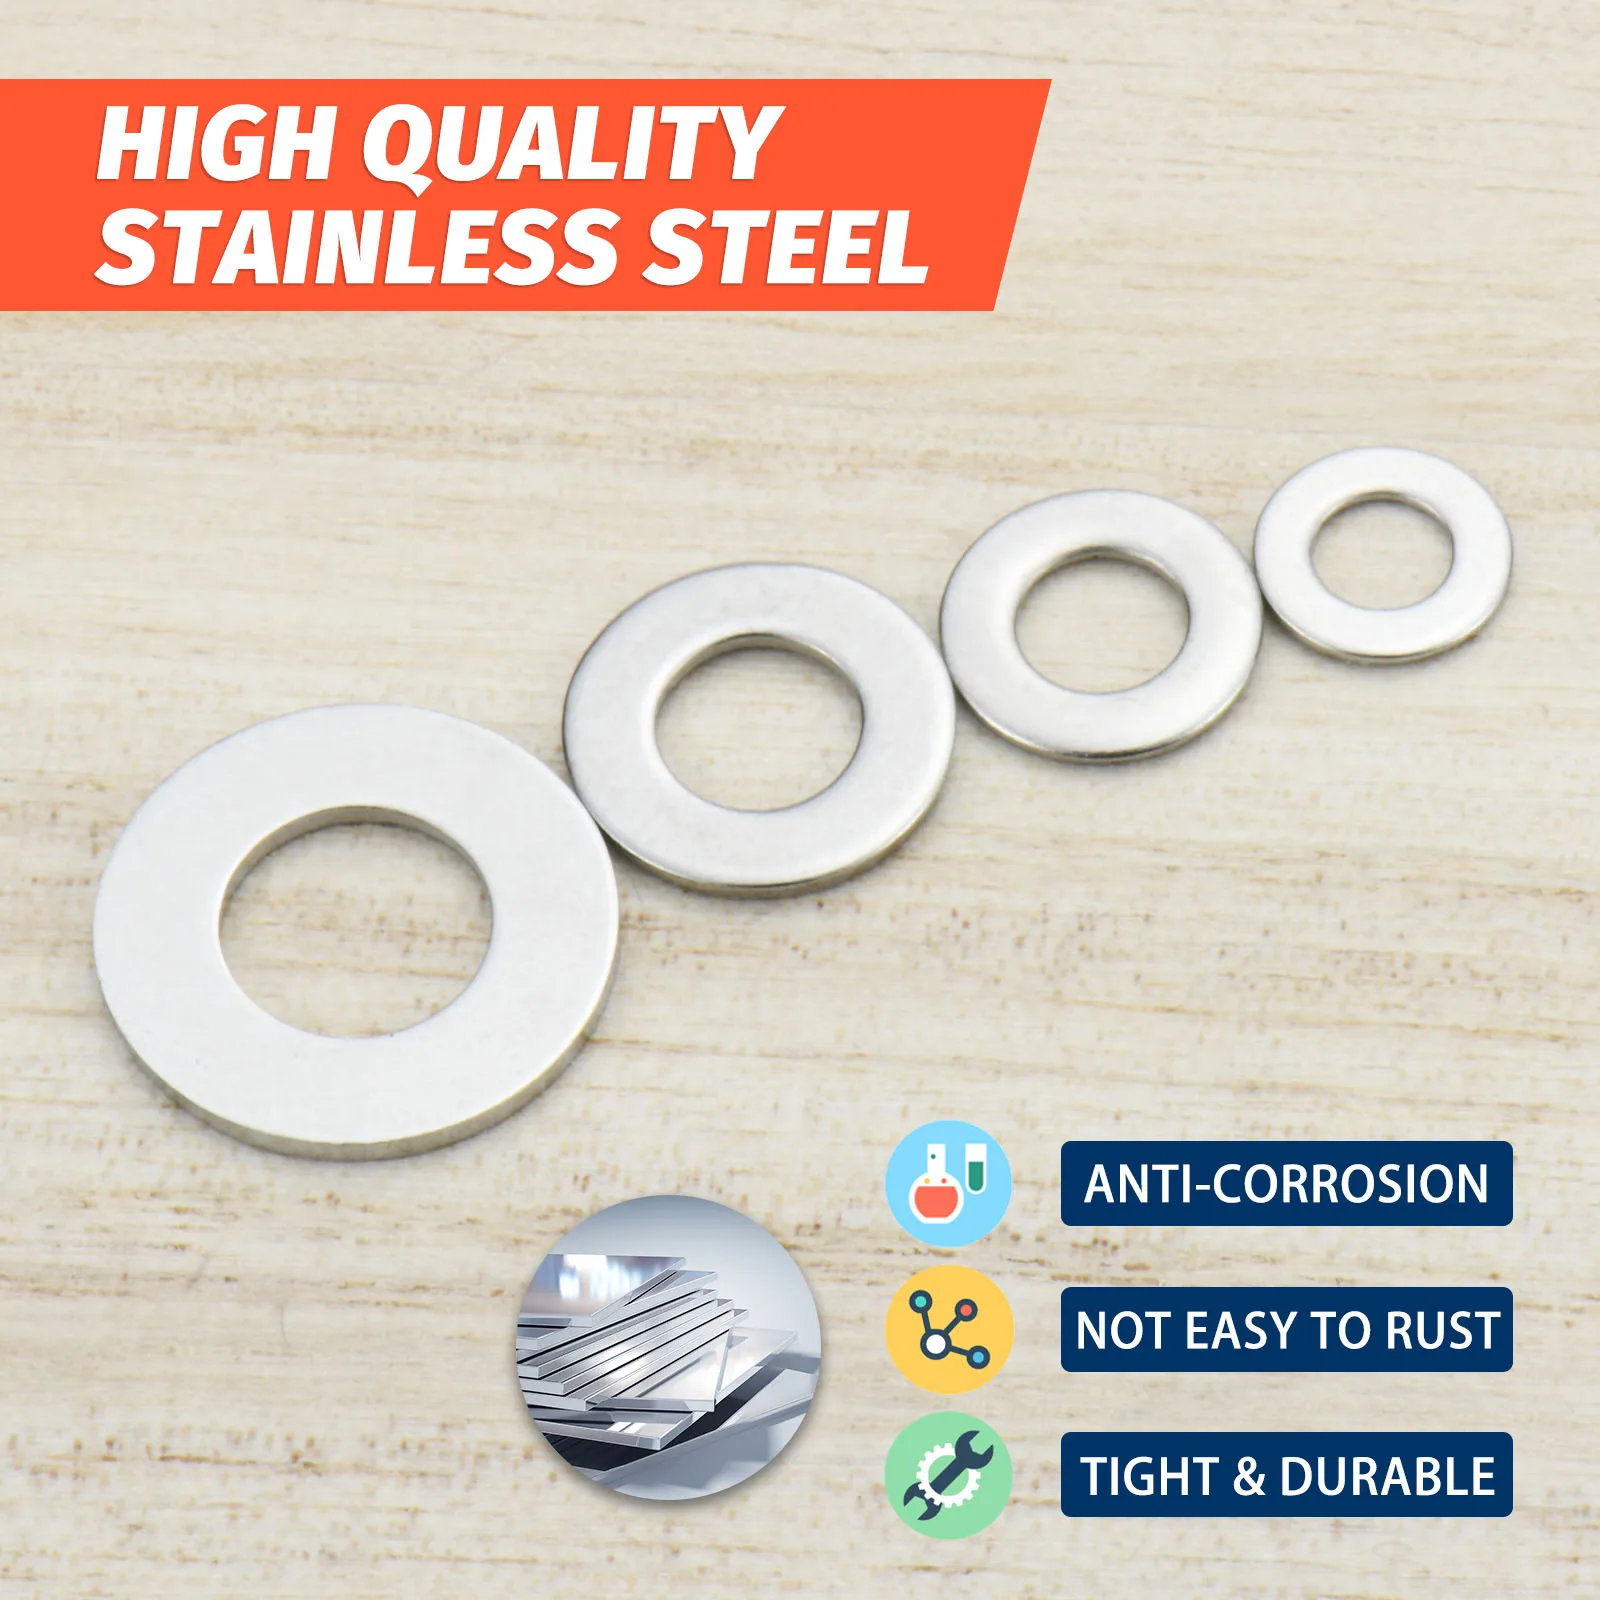 95Pcs Stainless Steel Flat Washers for Screws Bolts, M4 M5 M6 M8 Washers Assortment Set, Assorted Lock Metal Washers Kit DIN125